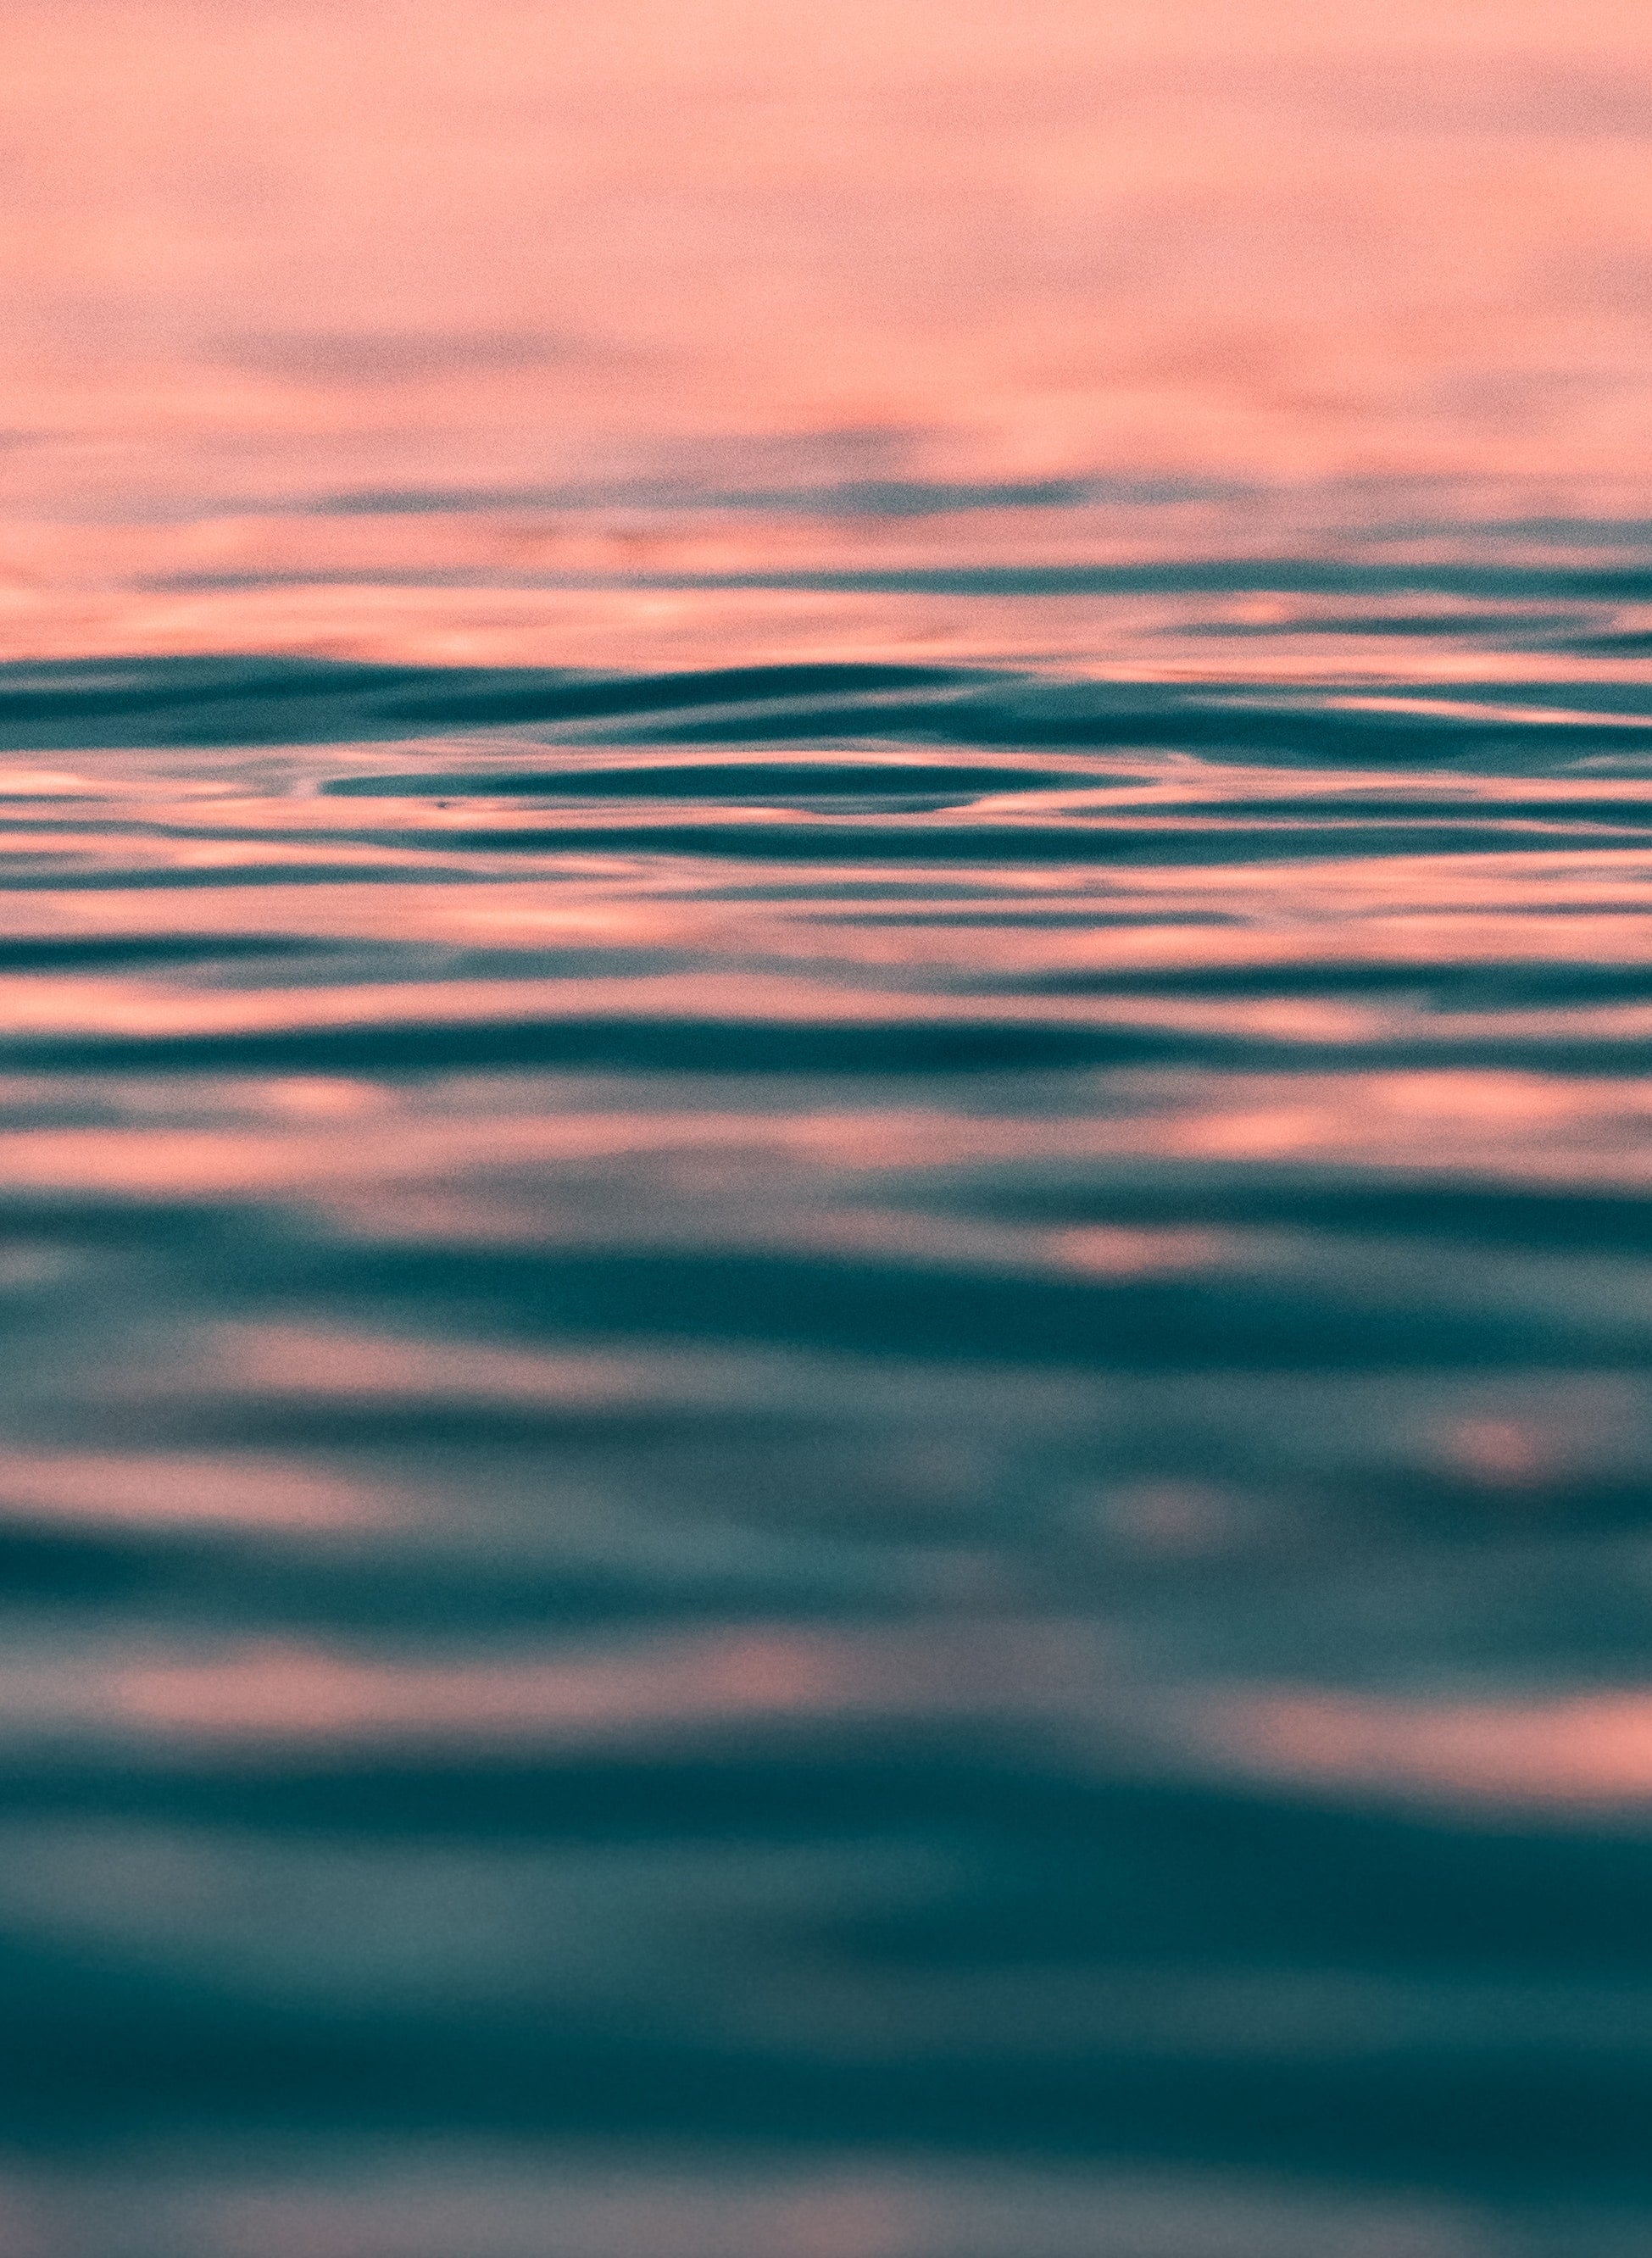 Pastel Ocean Water Iphone Wallpaper The Best Ios 14 Wallpaper Ideas That Ll Make Your Phone Look Aesthetically Pleasing Af Popsugar Tech Photo 5